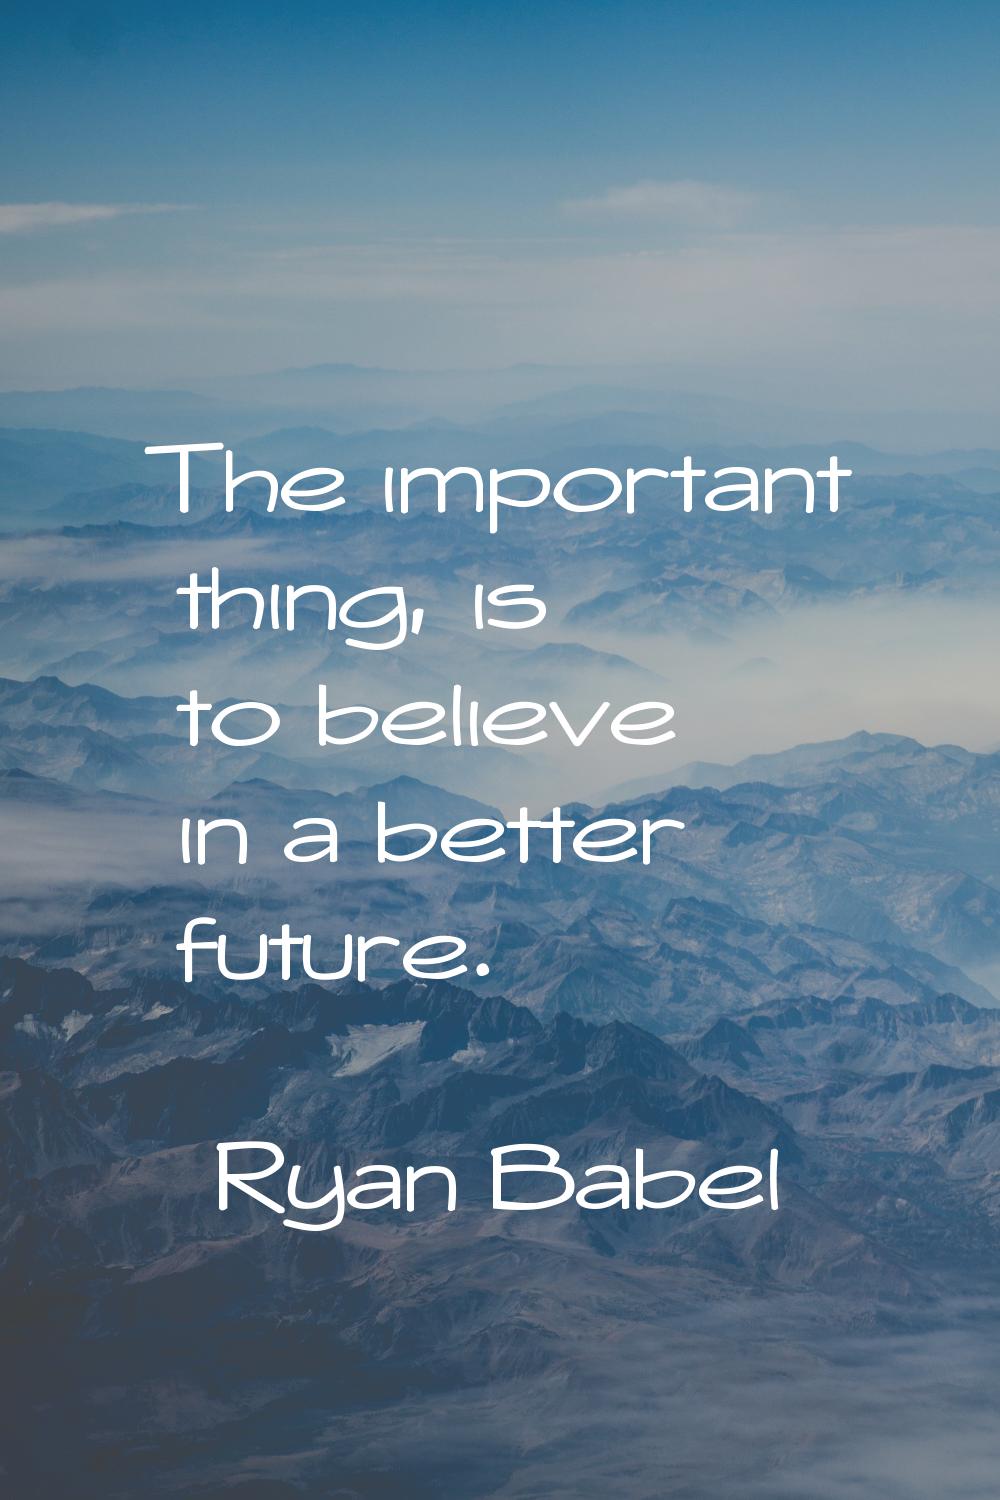 The important thing, is to believe in a better future.